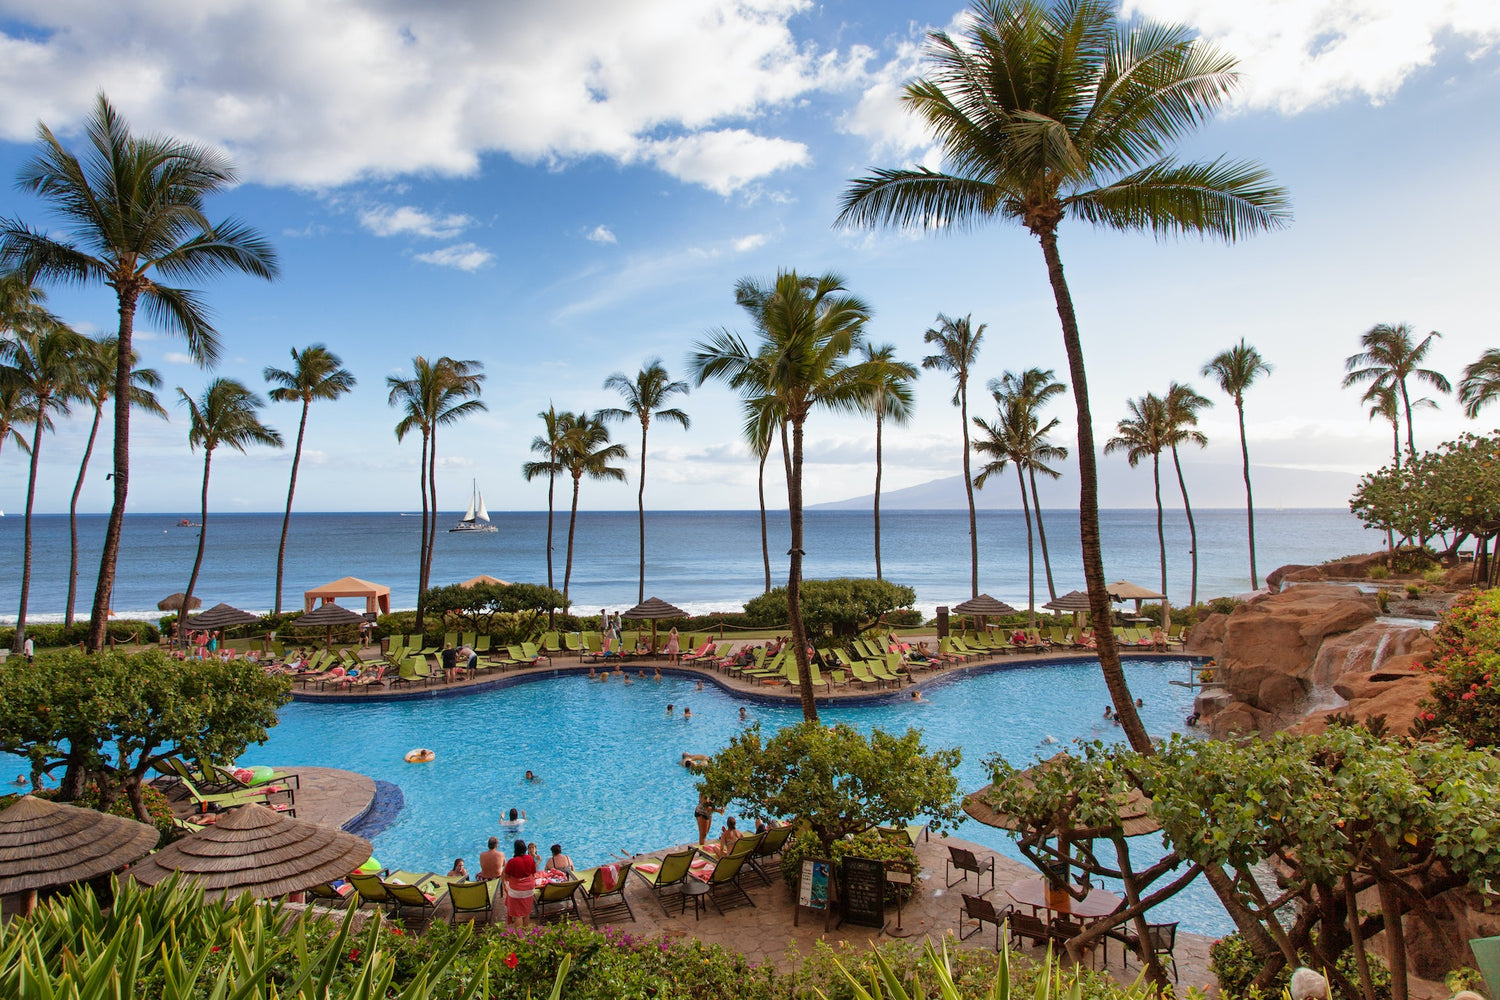 Maui, Hawaii resort with pool, palm trees, sail boat, beach and ocean for local SEO in Maui